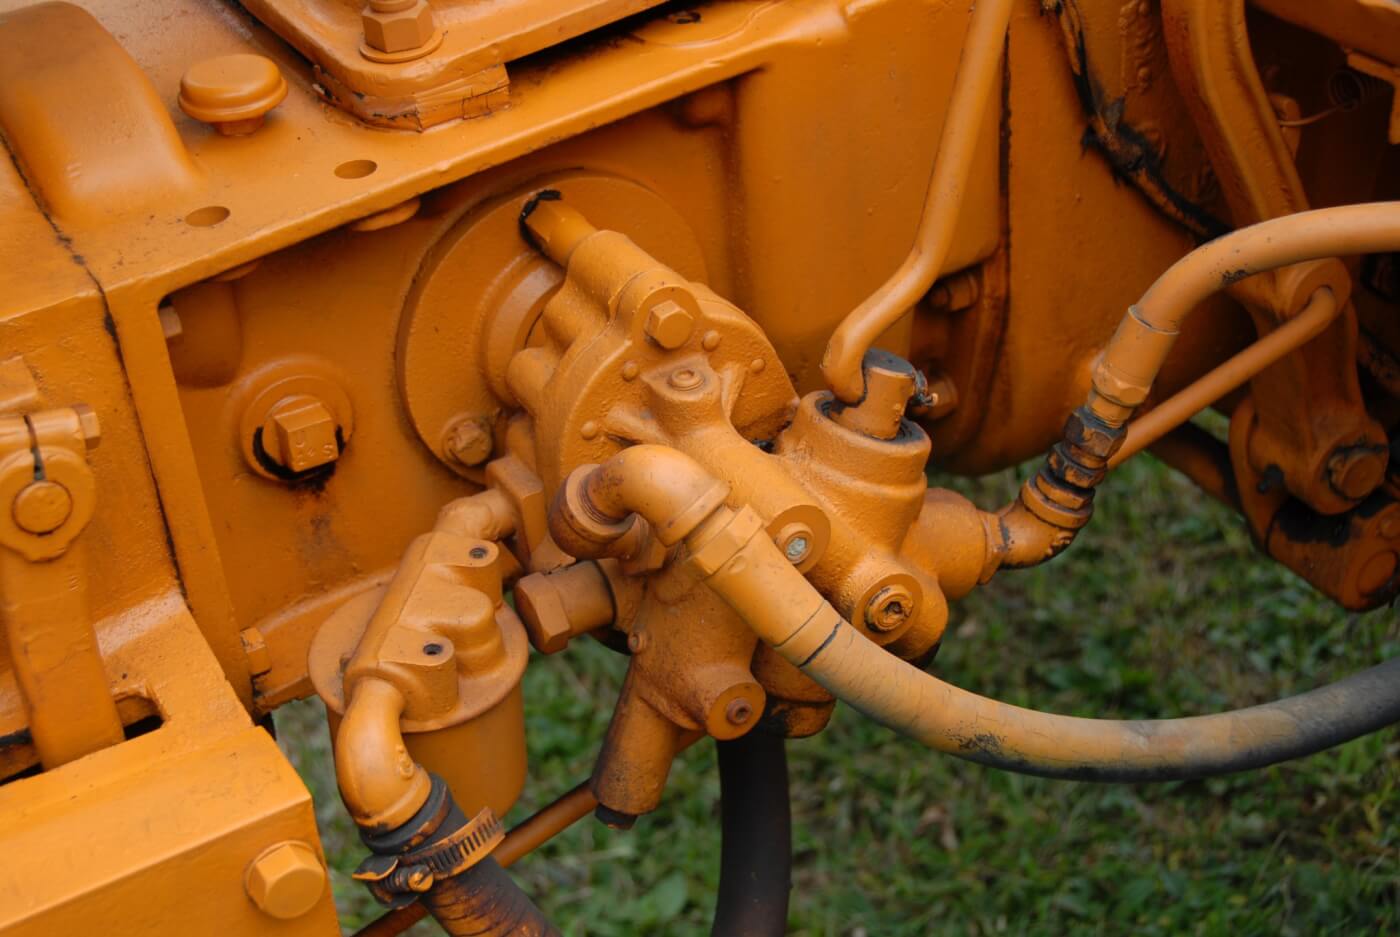 Sheppard had an optional hydraulic system, which was a premium feature in that era. The pump was a transmission driven, 11 GPM unit and capable of up to 1000 psi. The bypass was adjustable to raise or lower the pressure as needed according to the application.